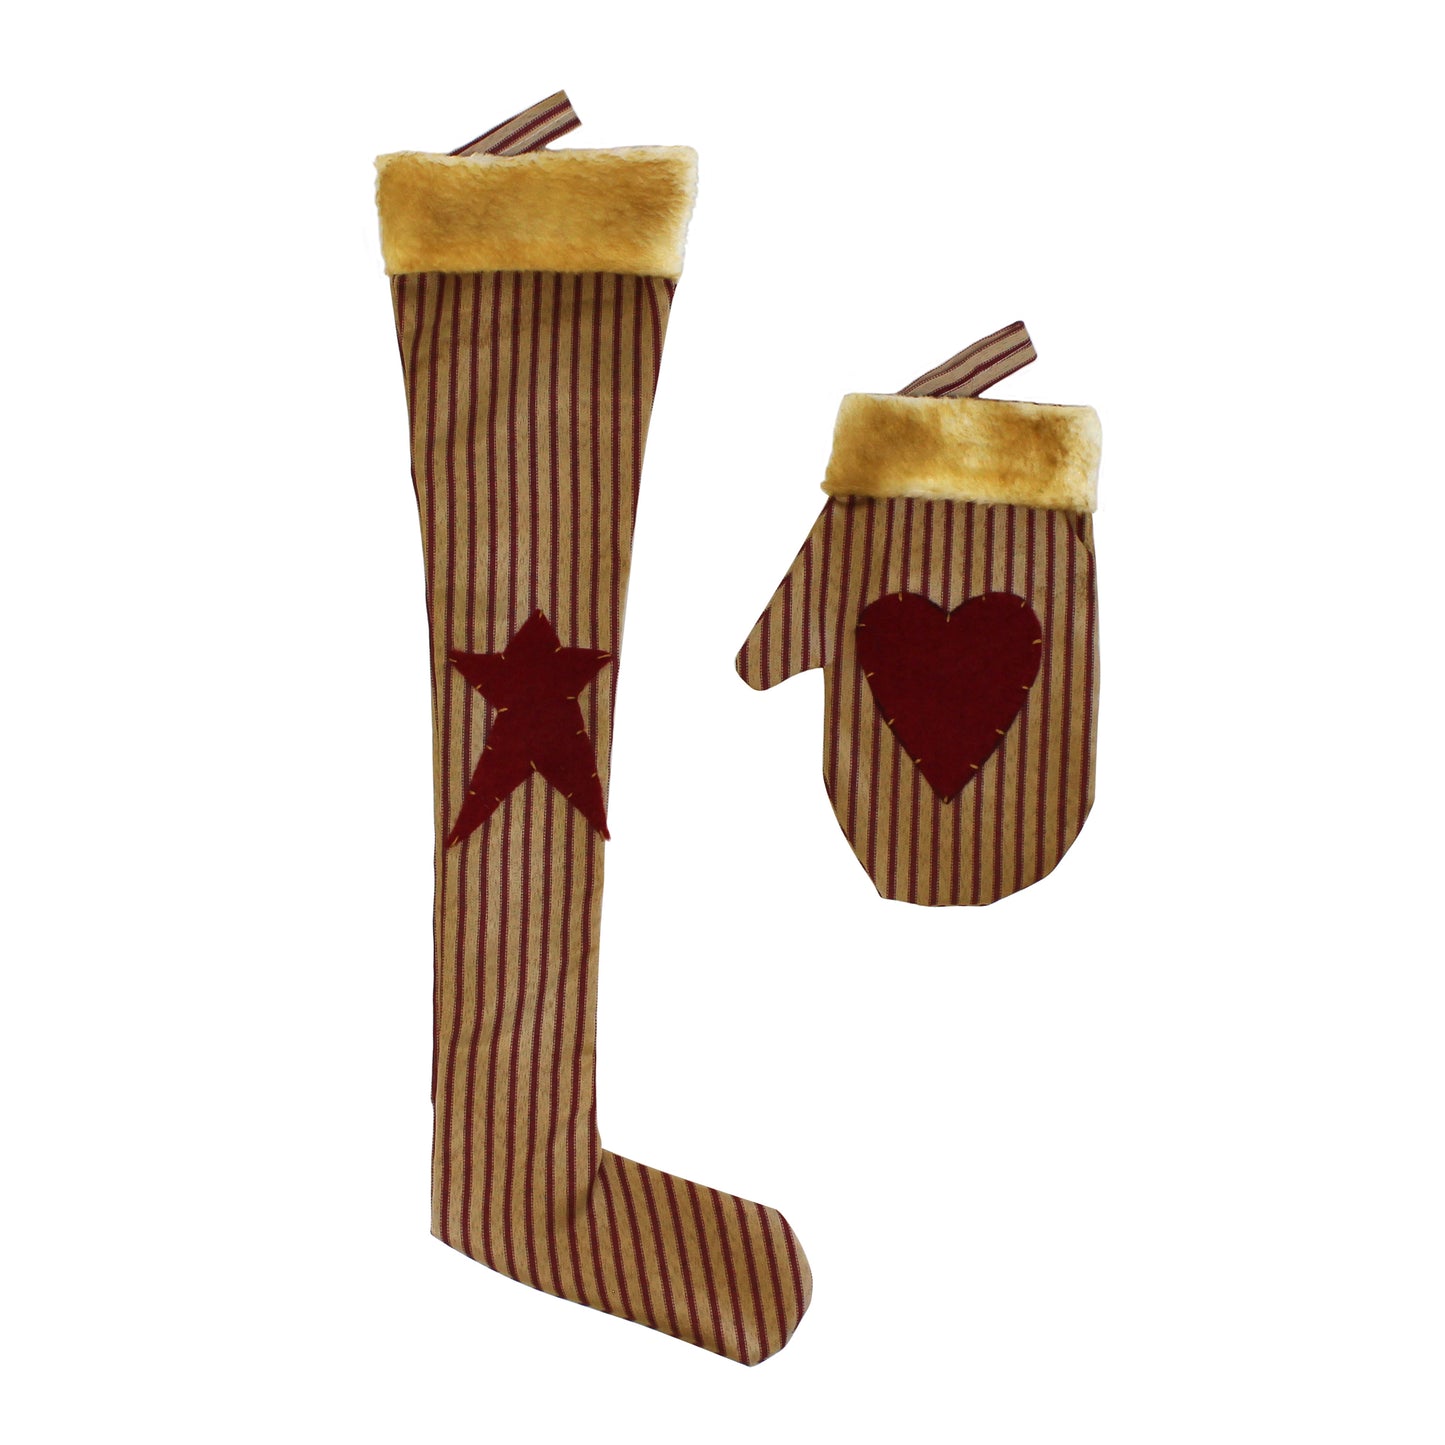 CVHOMEDECO. Rustic Antique Christmas Tree Hanging Stocking with Glove, Primitives Star, Heart Design Hanging Decoration Gifts, 2 Assorted